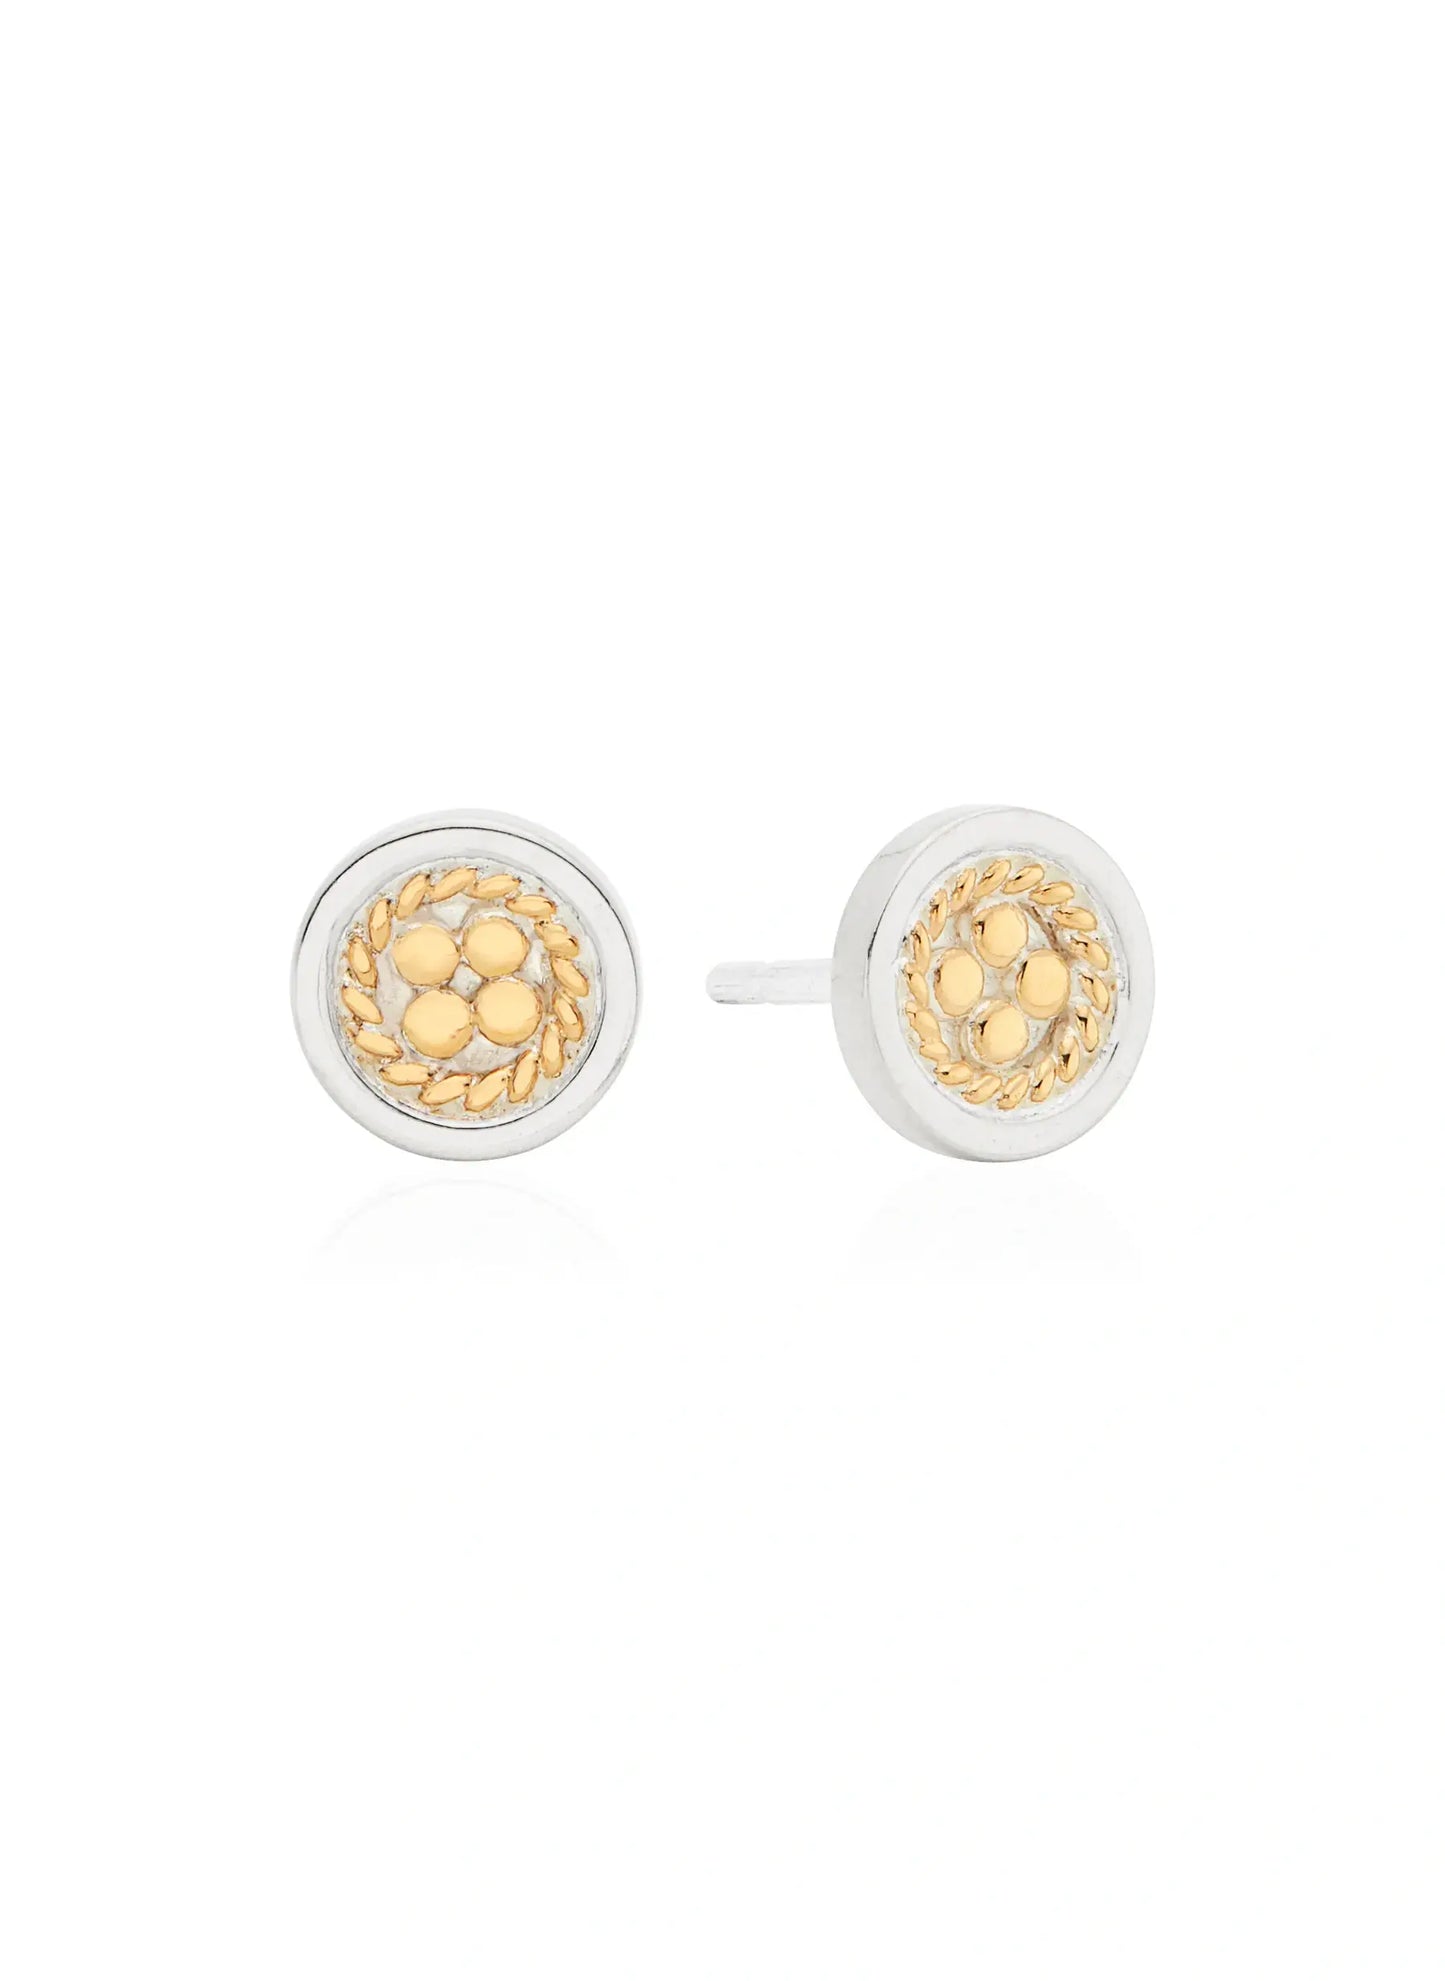 Smooth Rim Stud Earrings - Gold & Silver